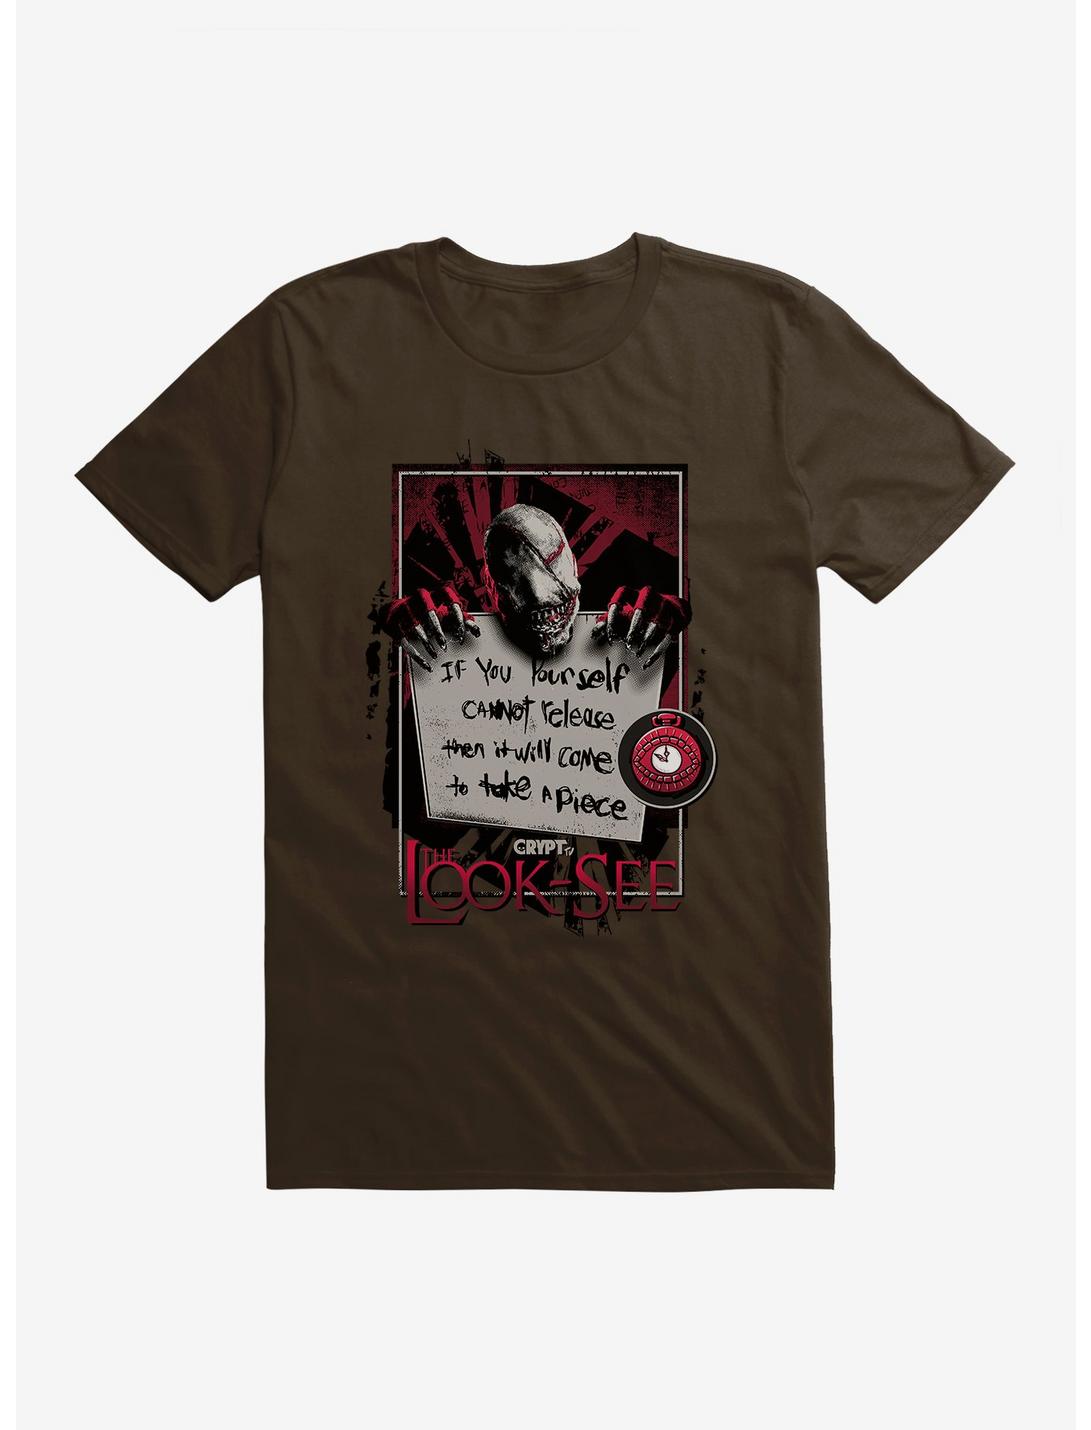 Crypt TV The Look-See Take A Piece T-Shirt, CHOCOLATE, hi-res